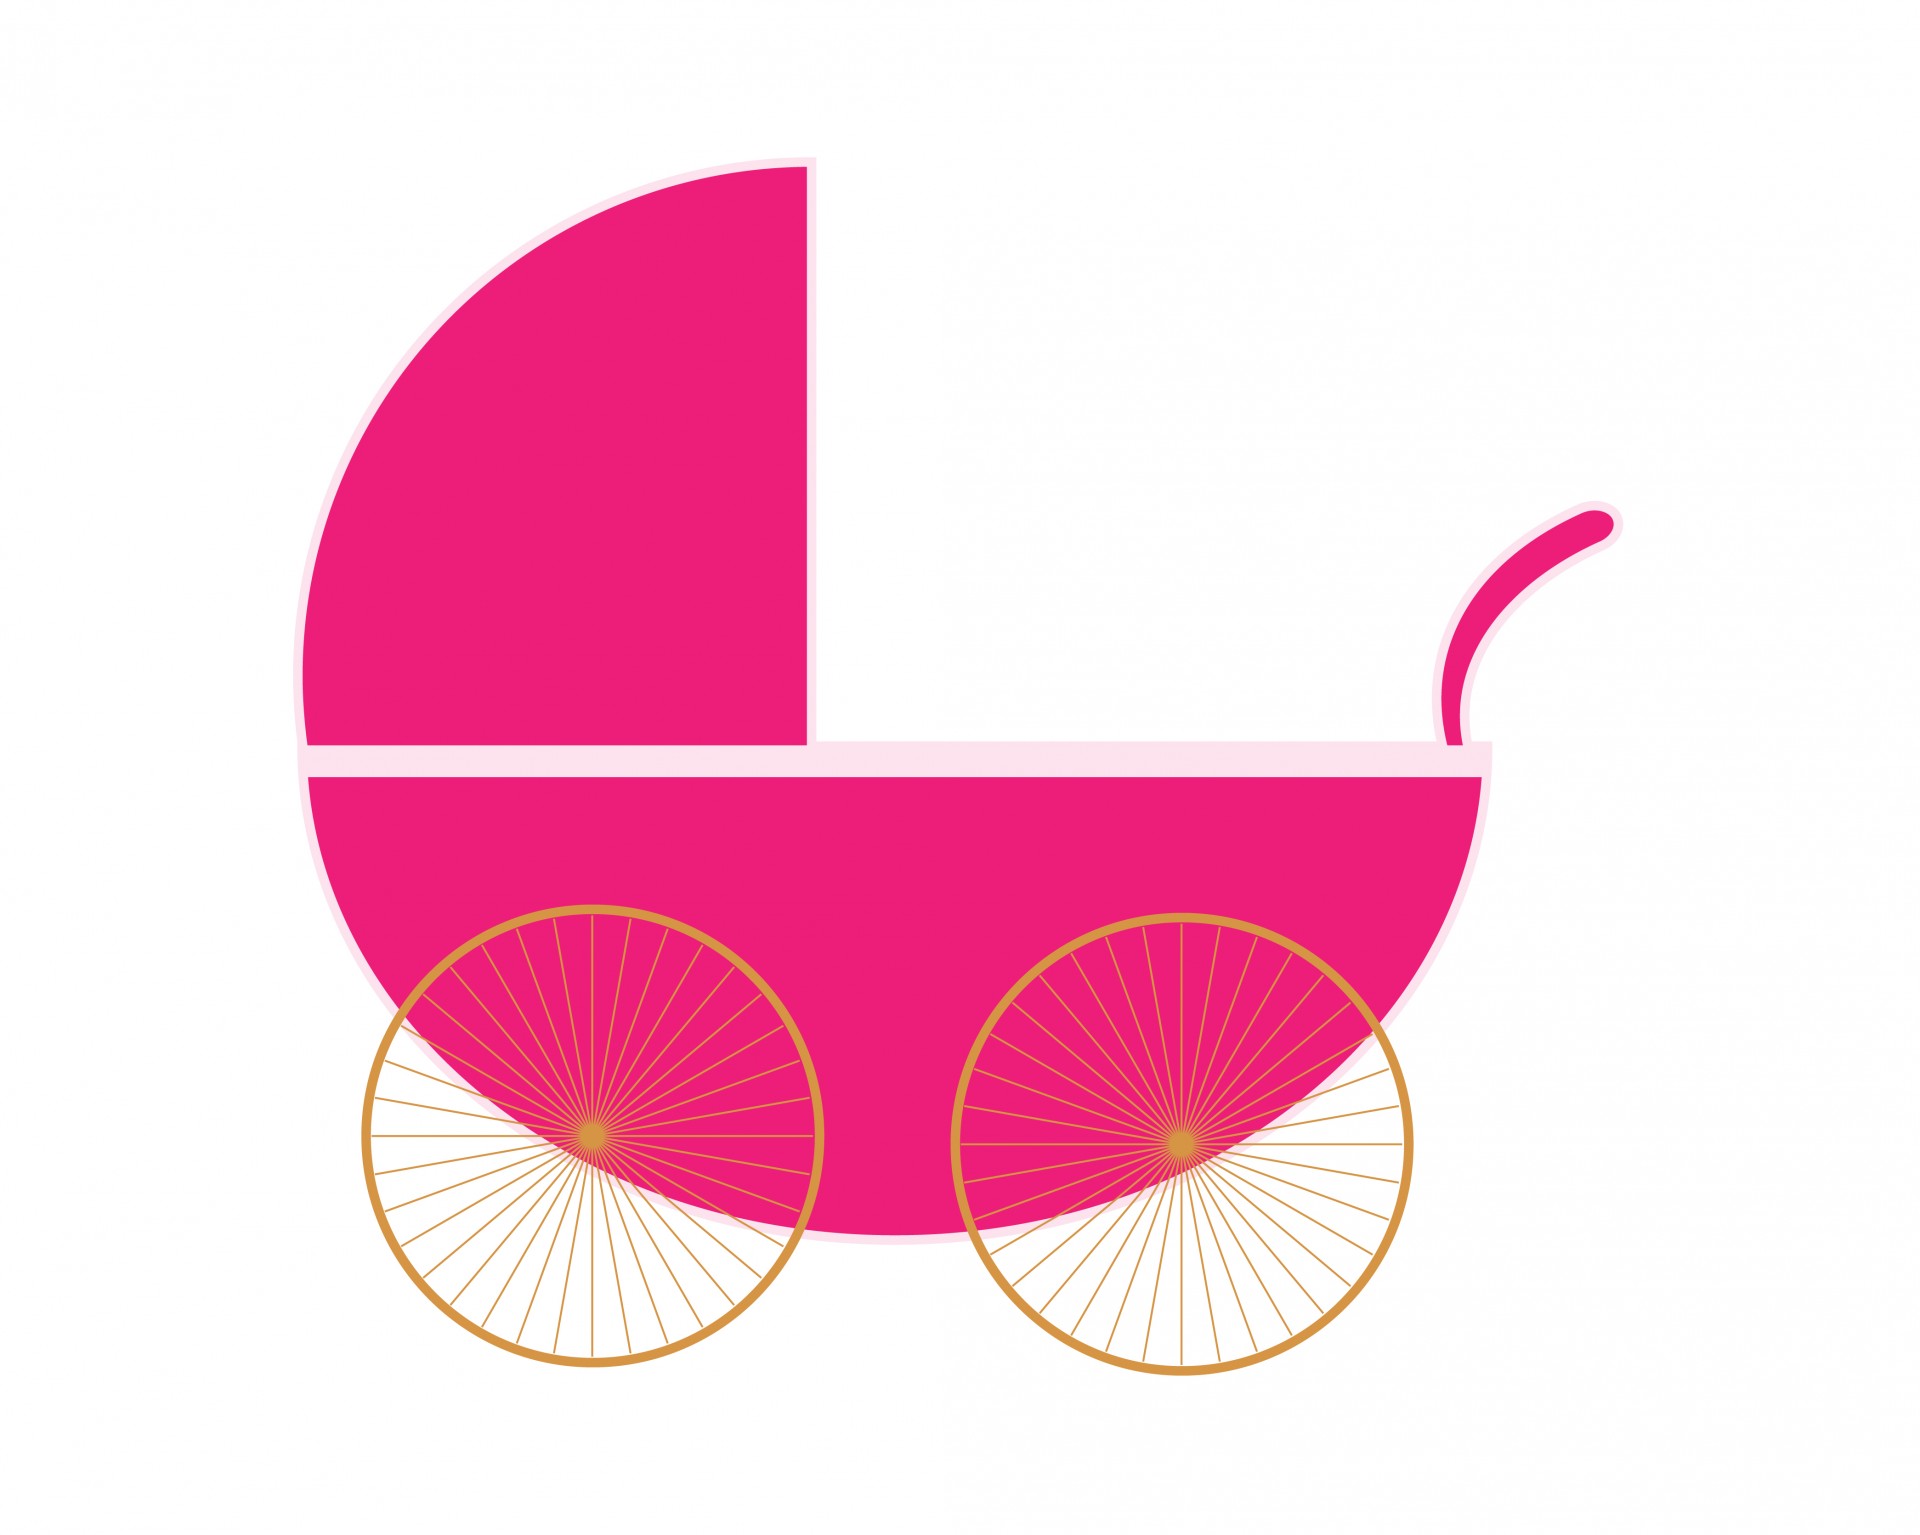 Baby Stroller Clipart craft projects, Symbols Clipart - Clipartoons